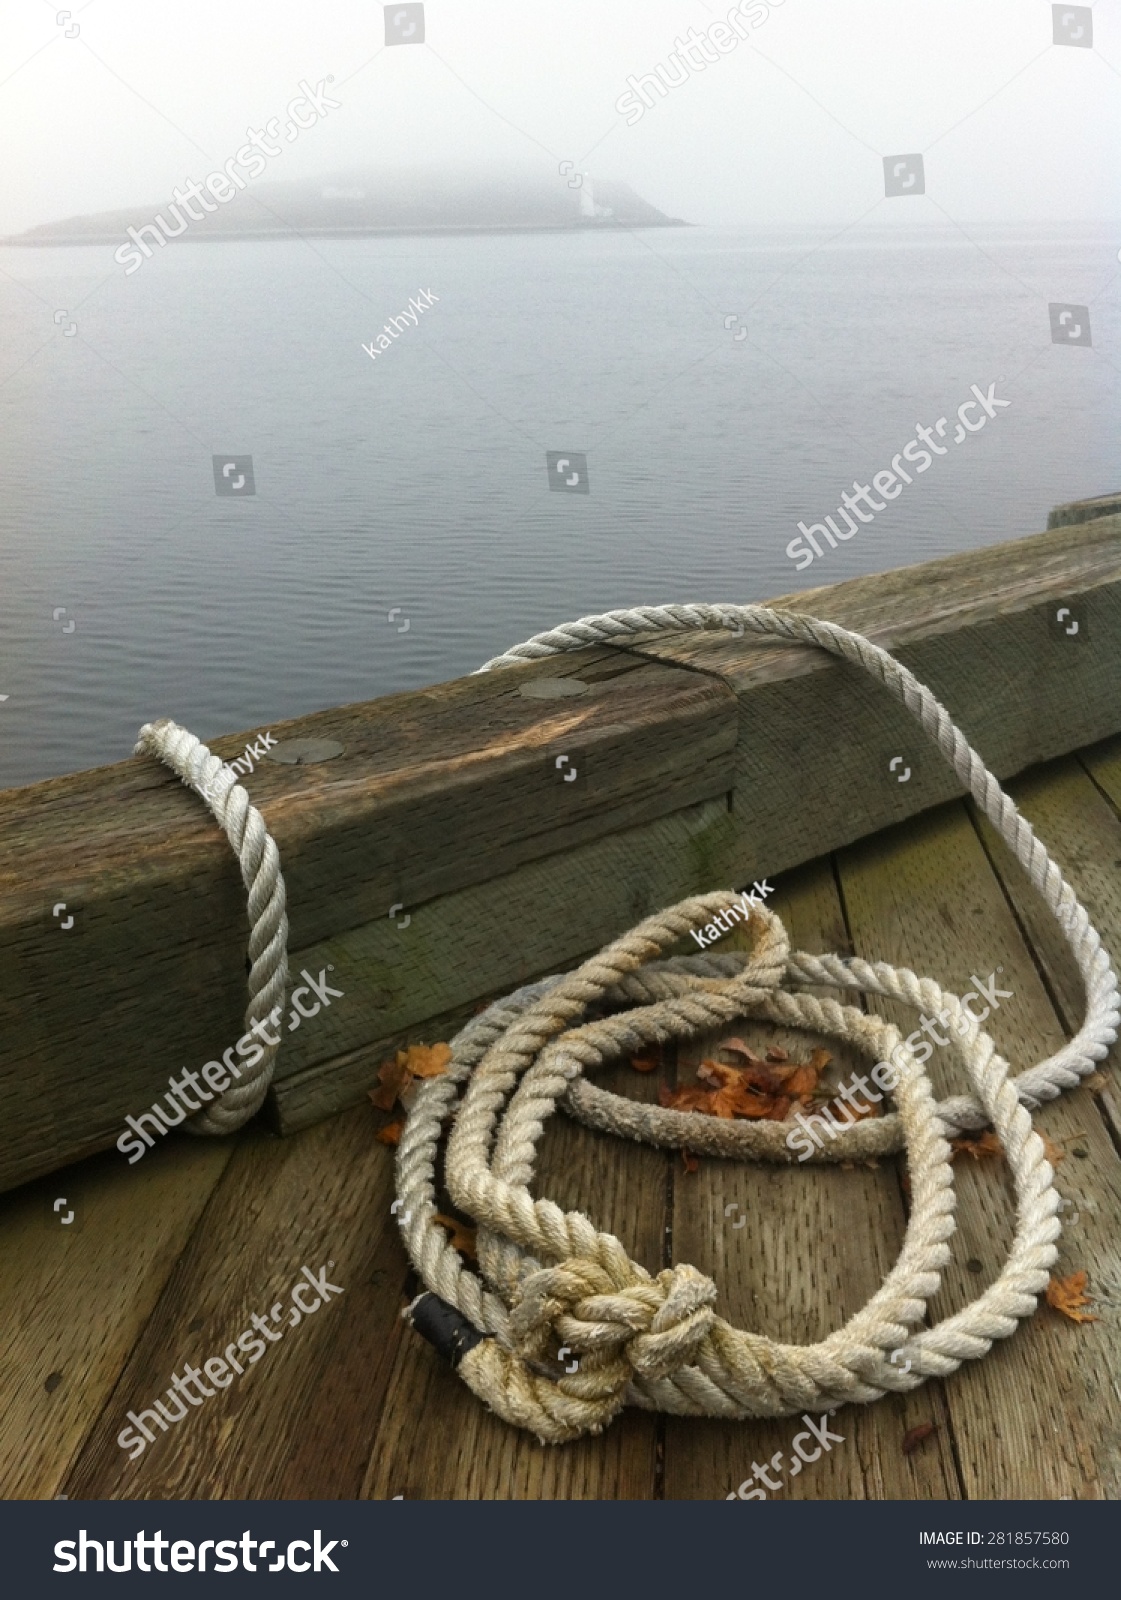 Rope at the pier #281857580